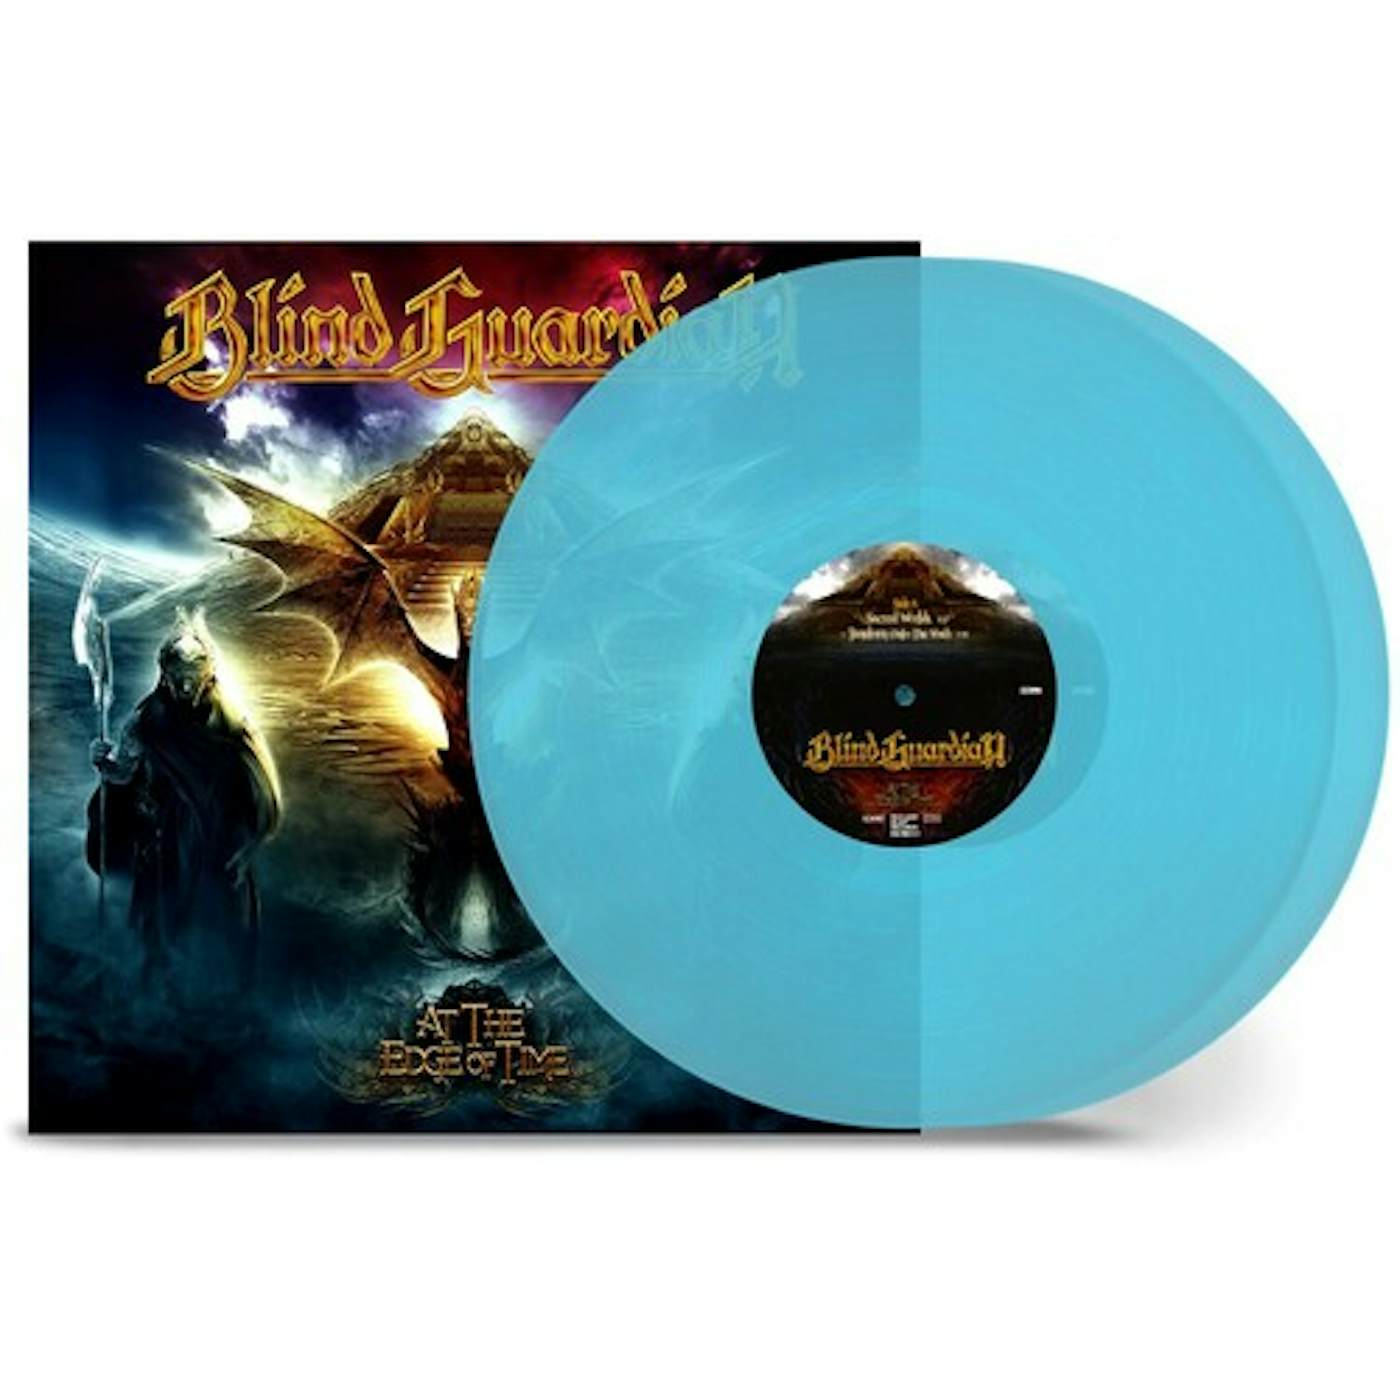 Blind Guardian AT THE EDGE OF TIME - CURACAO Vinyl Record